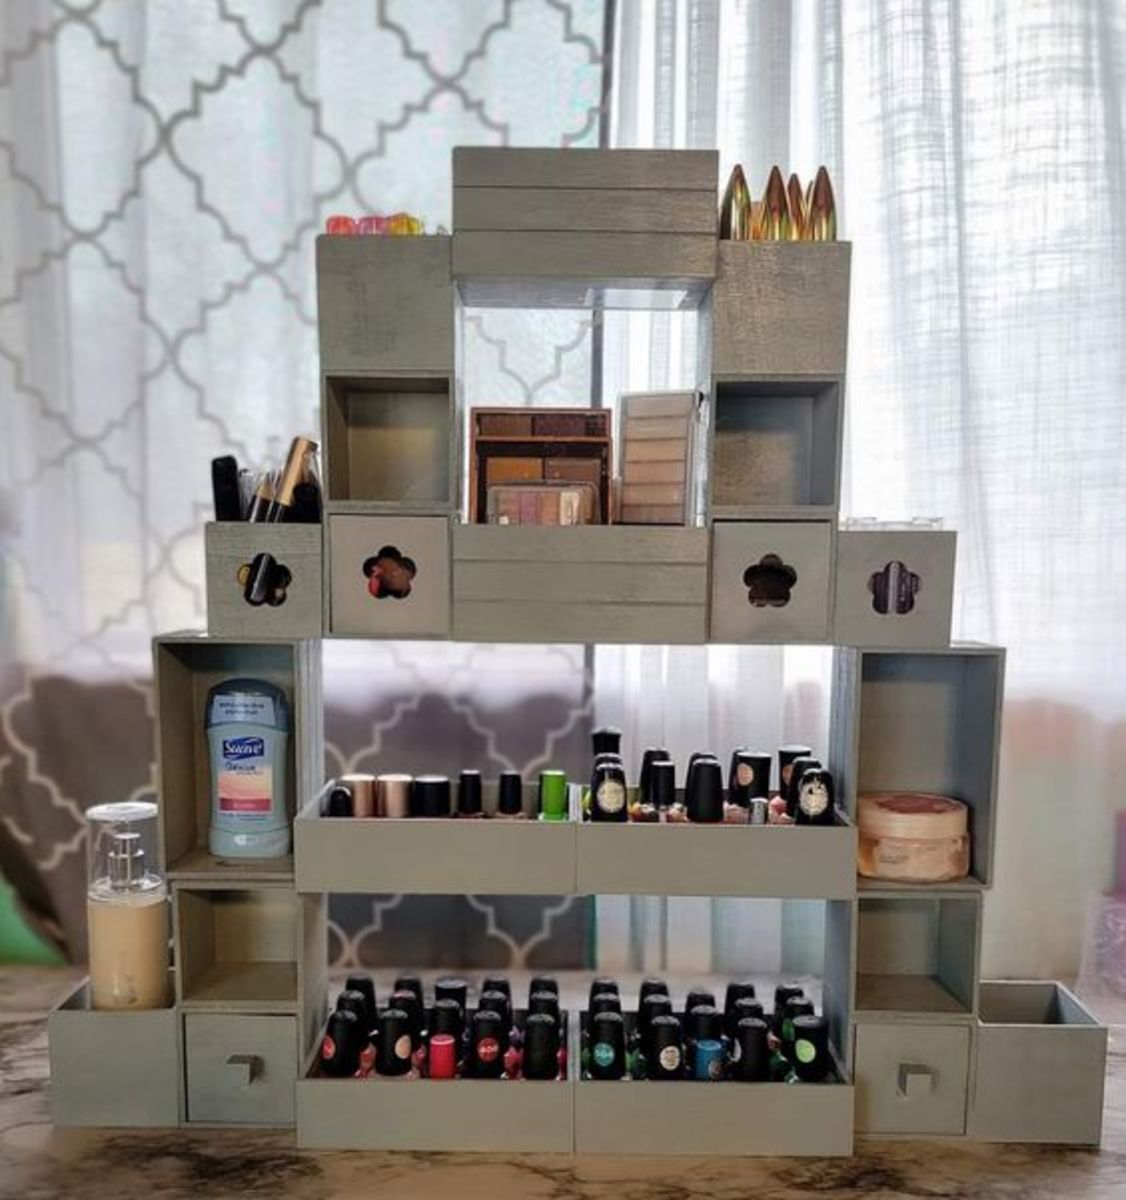 Makeup storage—use wooden boxes from Dollar Tree to customize a makeup organizer tower.